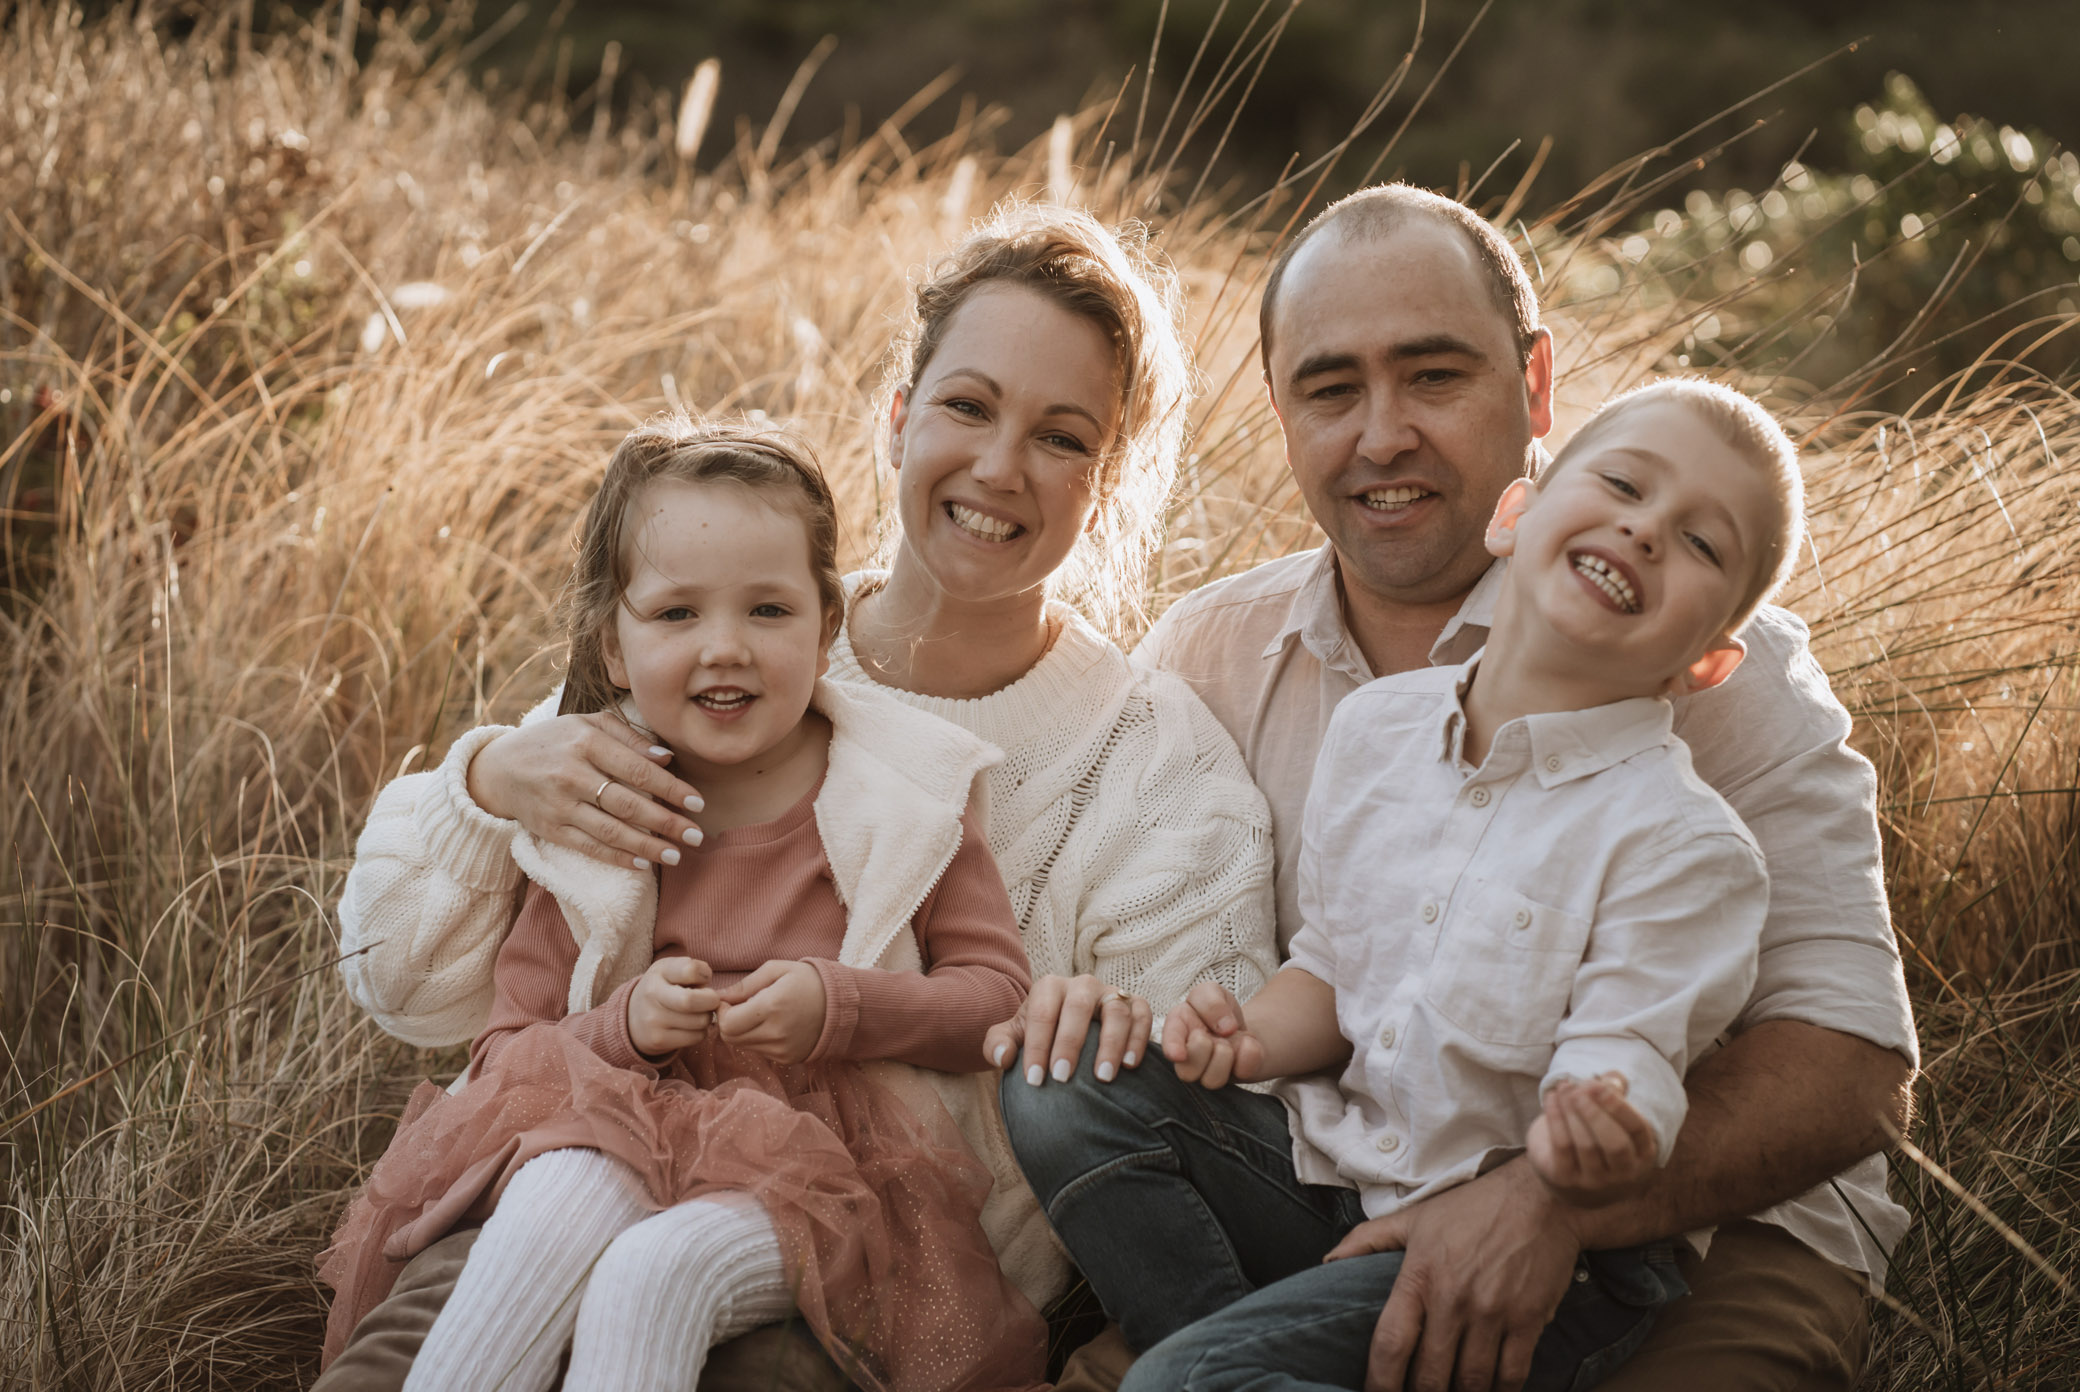 Primary Myelofybrosis patient Emma and her family